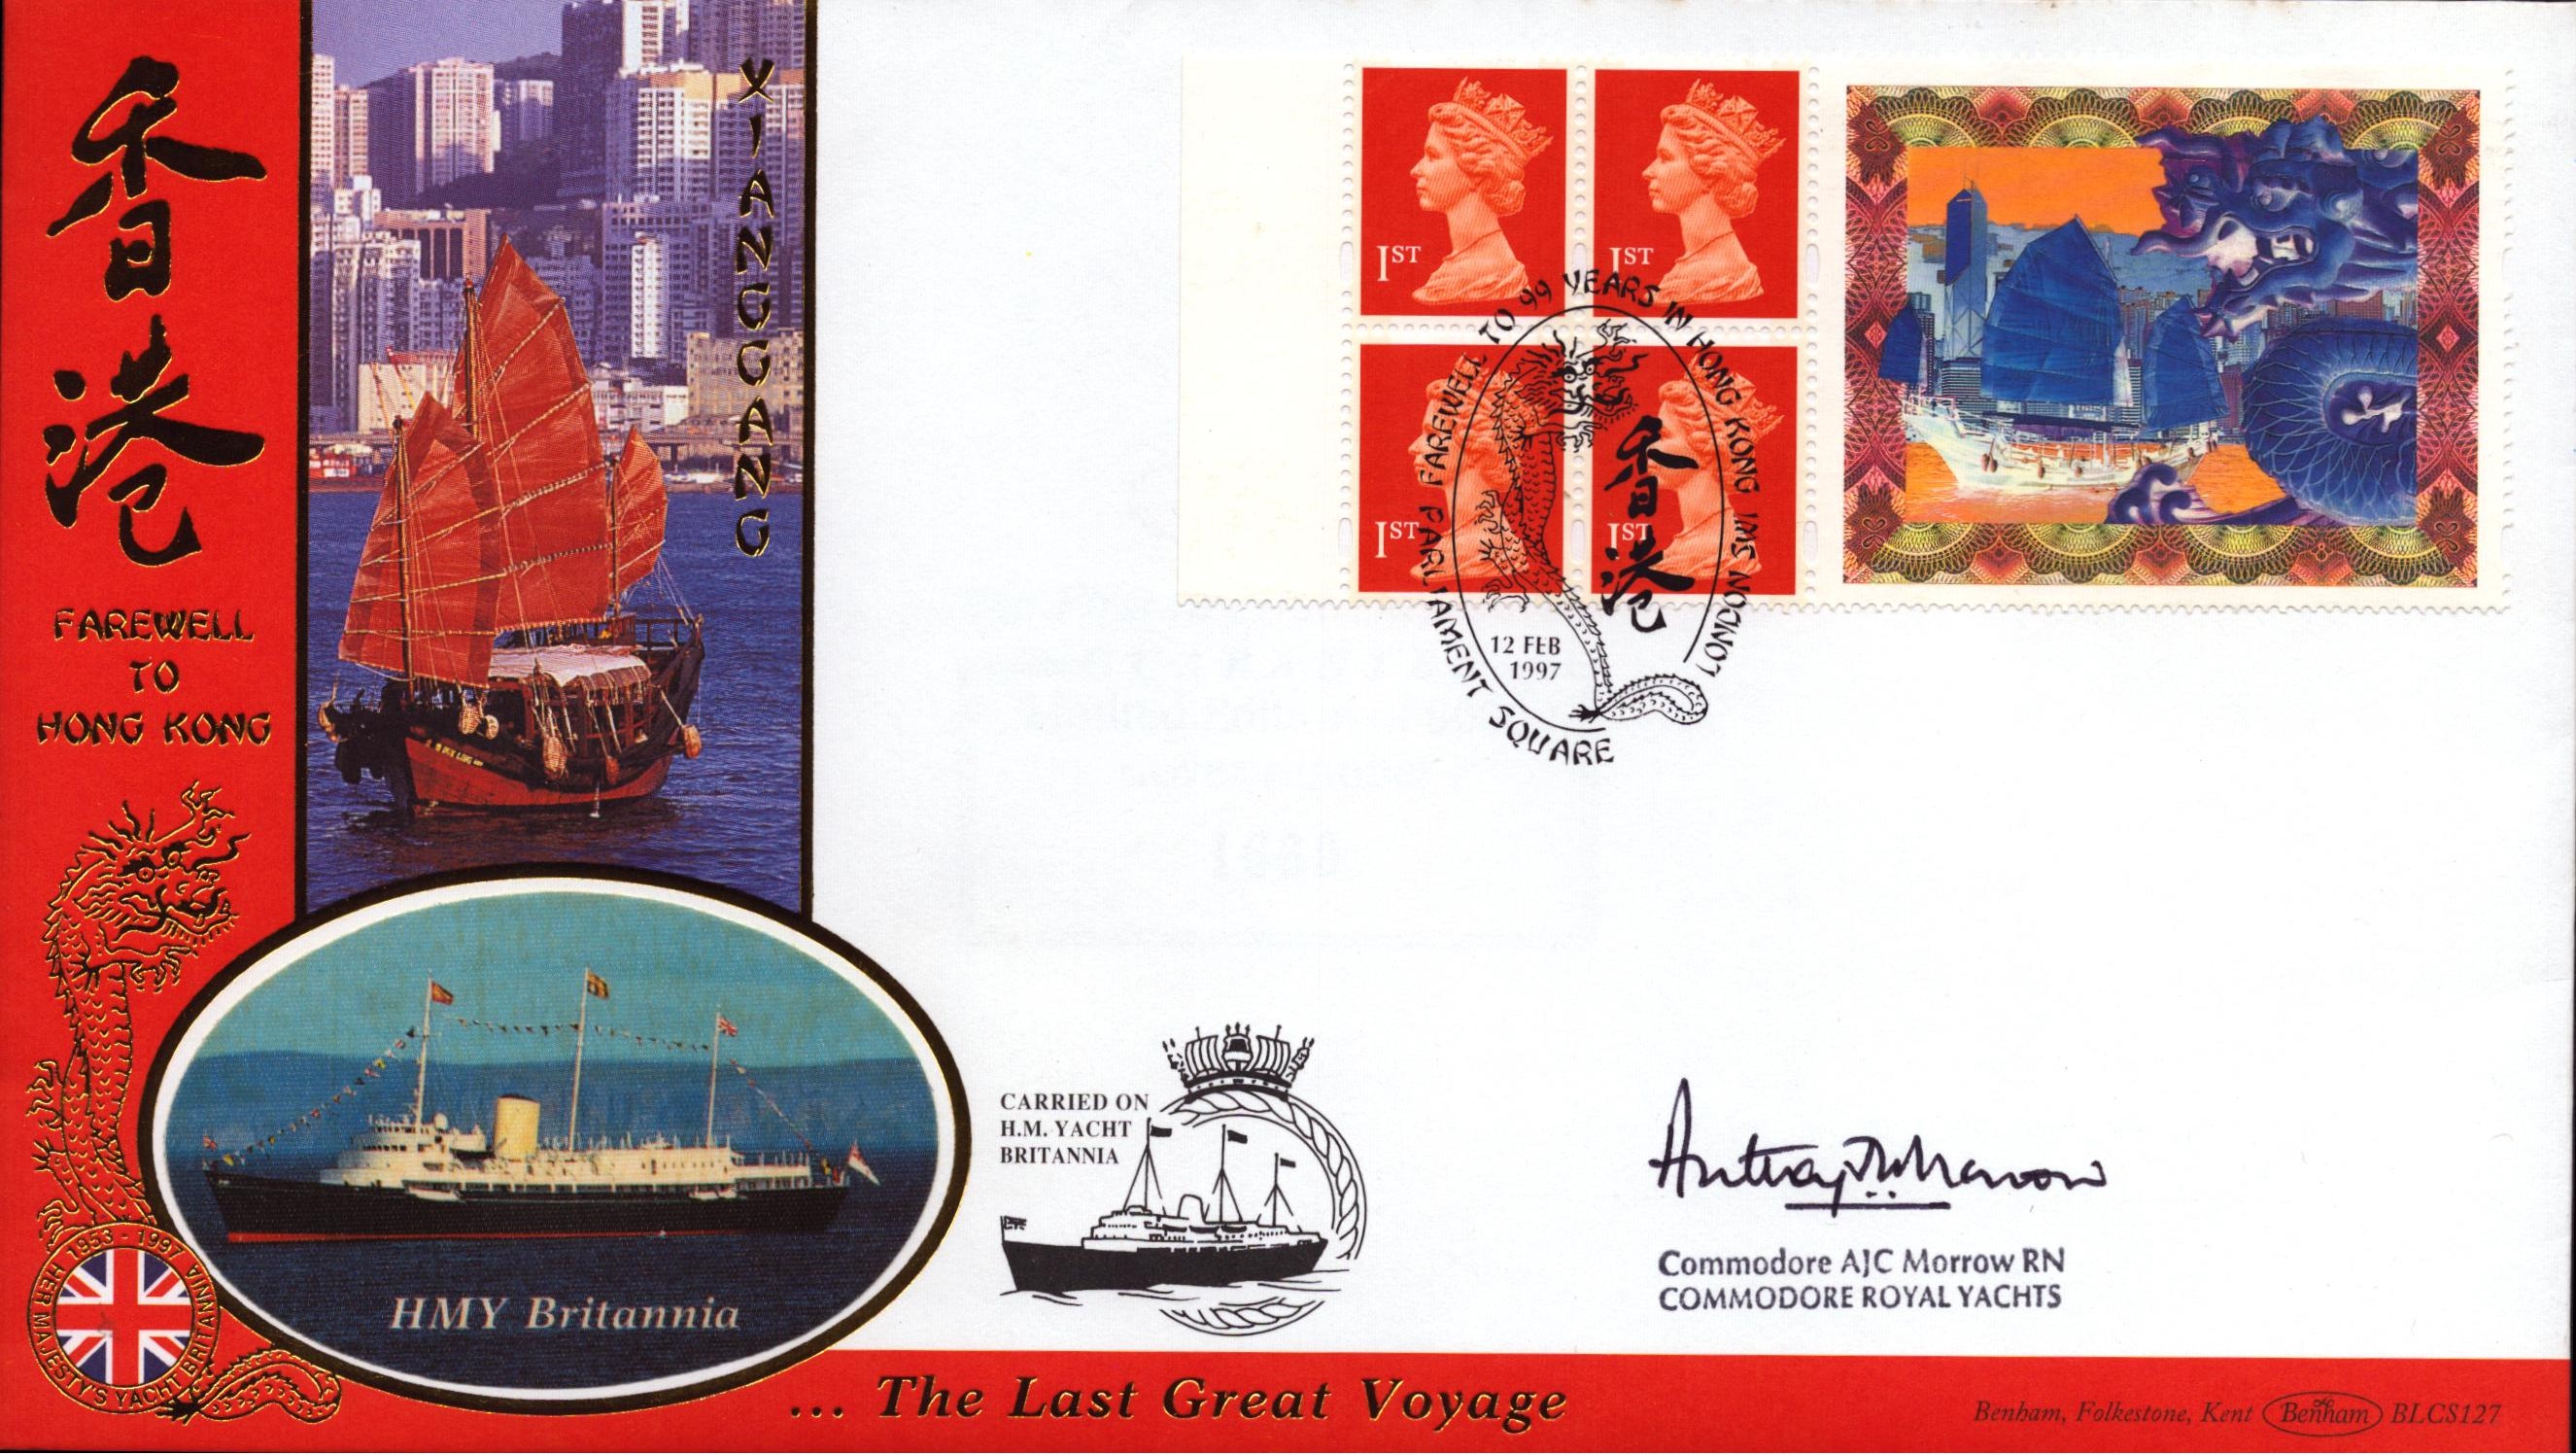 Cdr Morrow Commodore Royal Yachts signed lovely 1997 Farewell to Hong Kong miniature sheet booklet